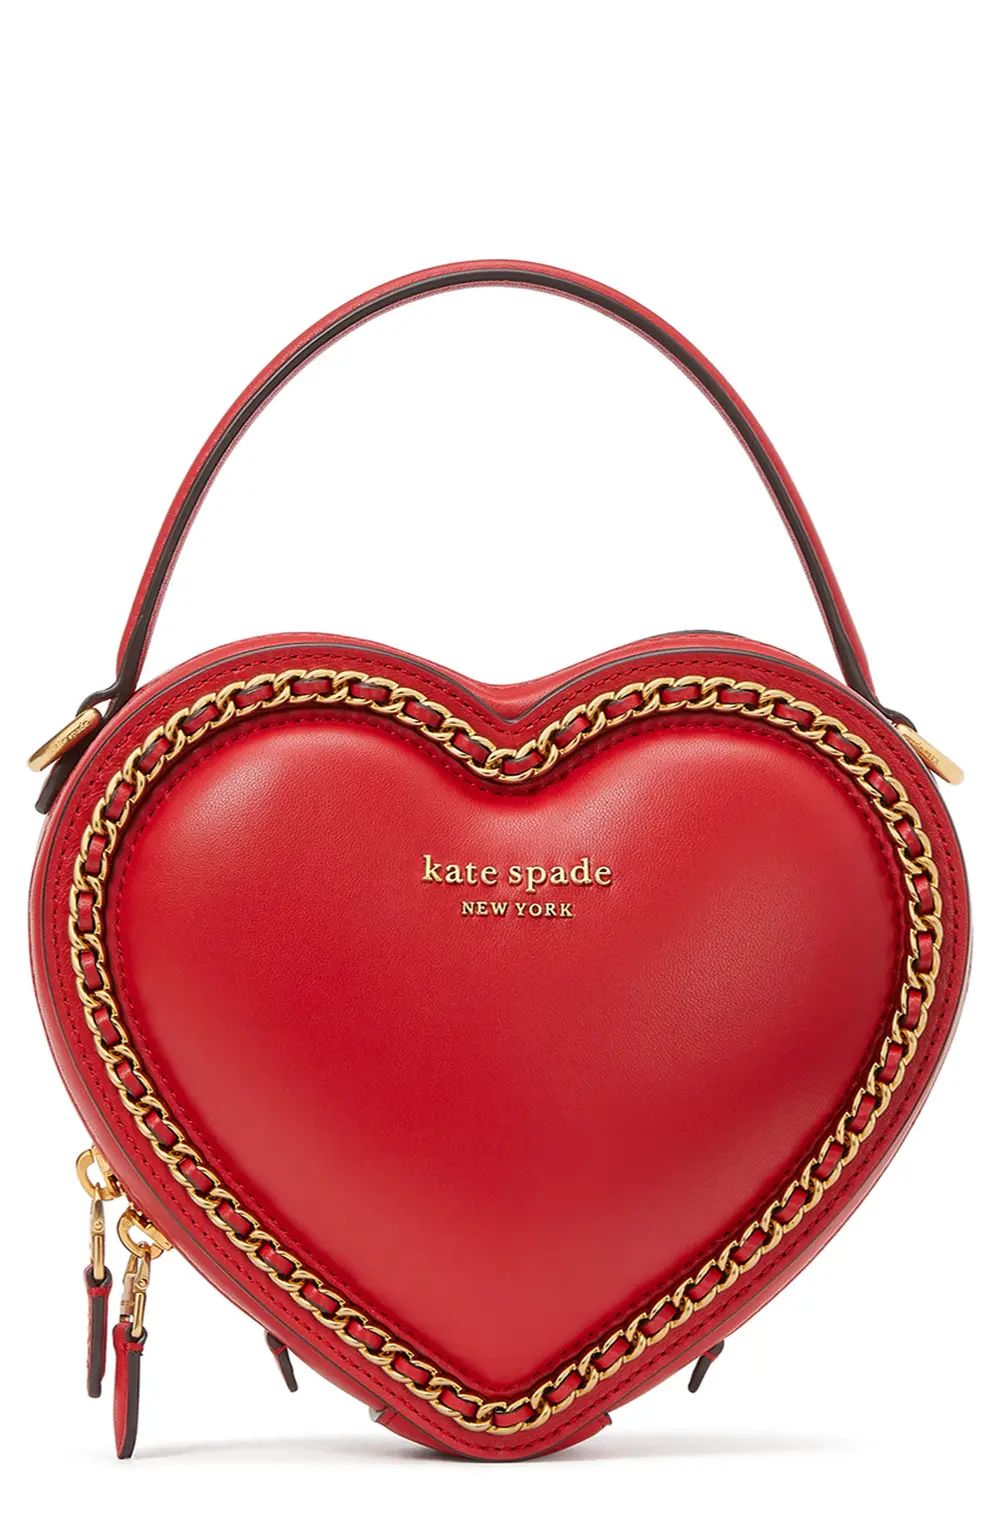 kate spade new york 3d heart leather crossbody bag in Lingonberry at Nordstrom | Nordstrom Canada